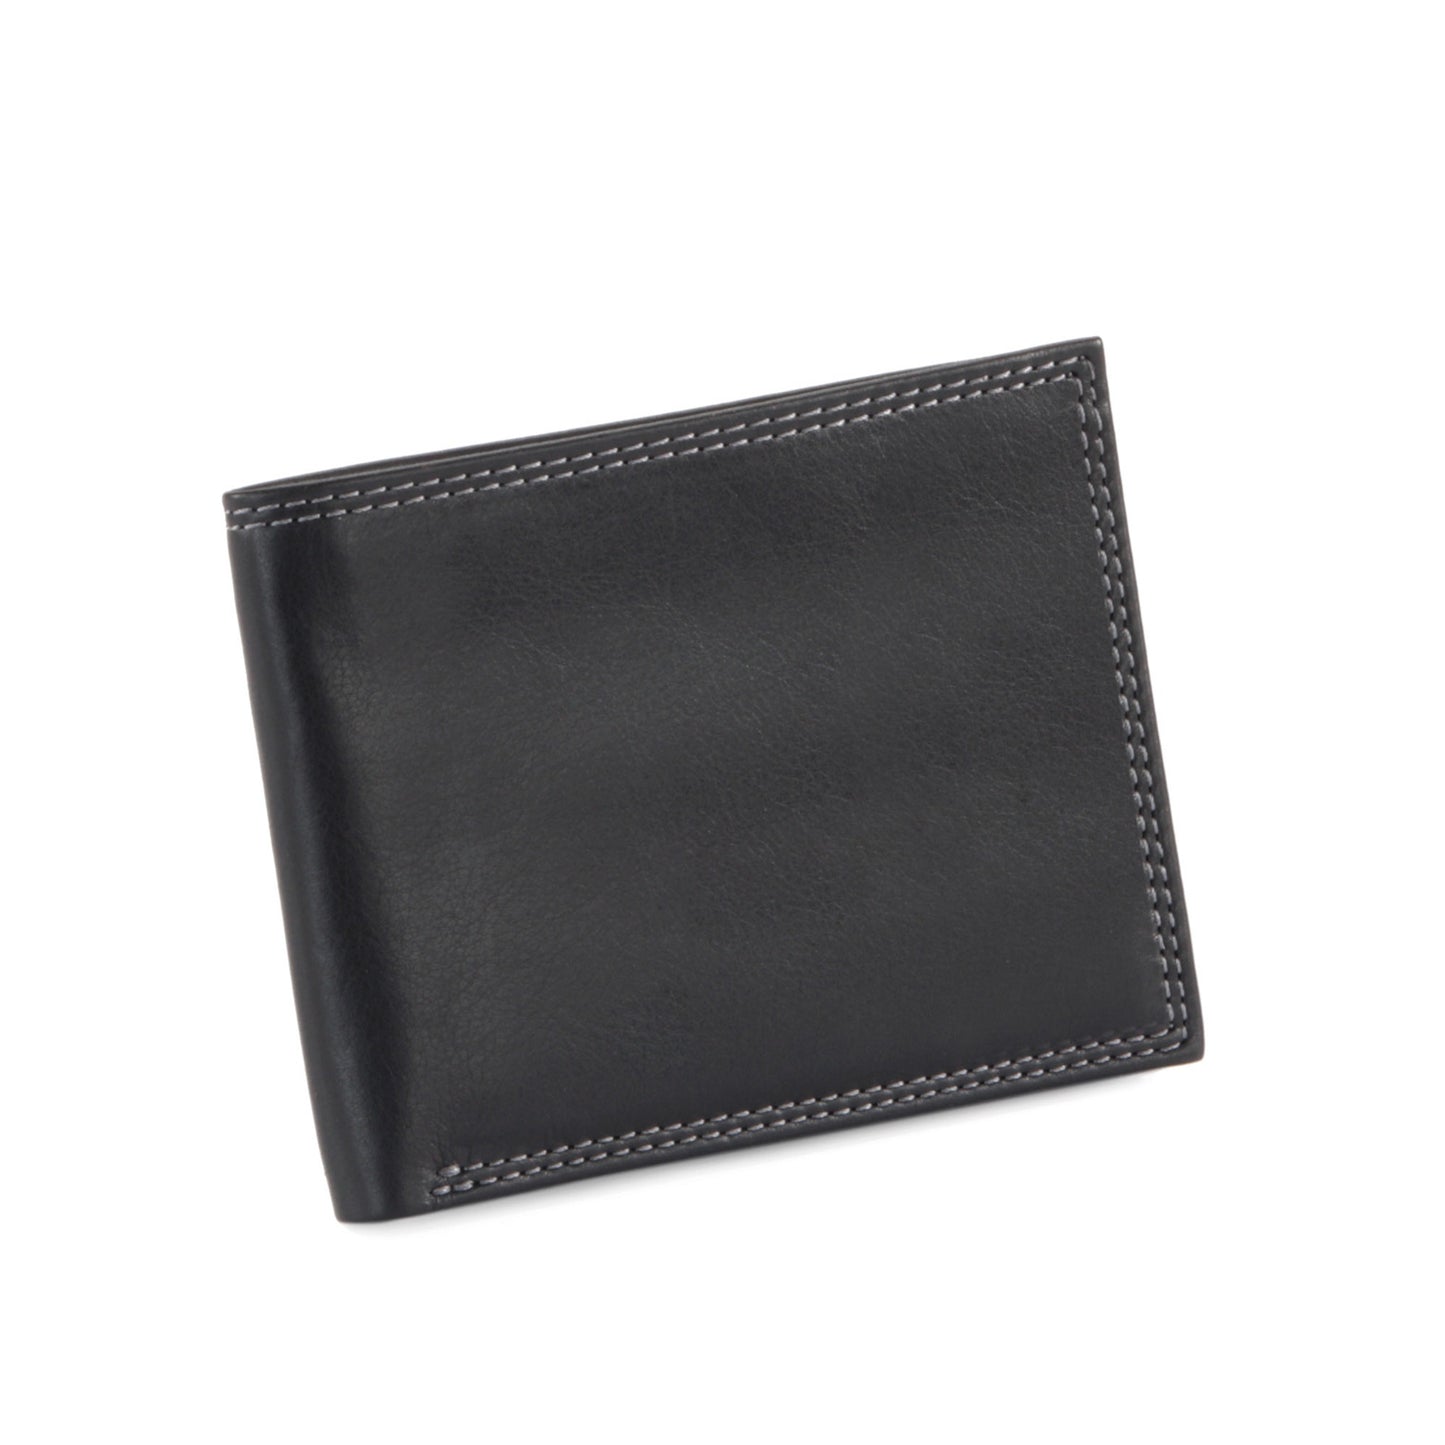 Style n Craft's Slim bi-fold wallet in black full grain grain leather with contrast color double stitching on the outside - closed front view